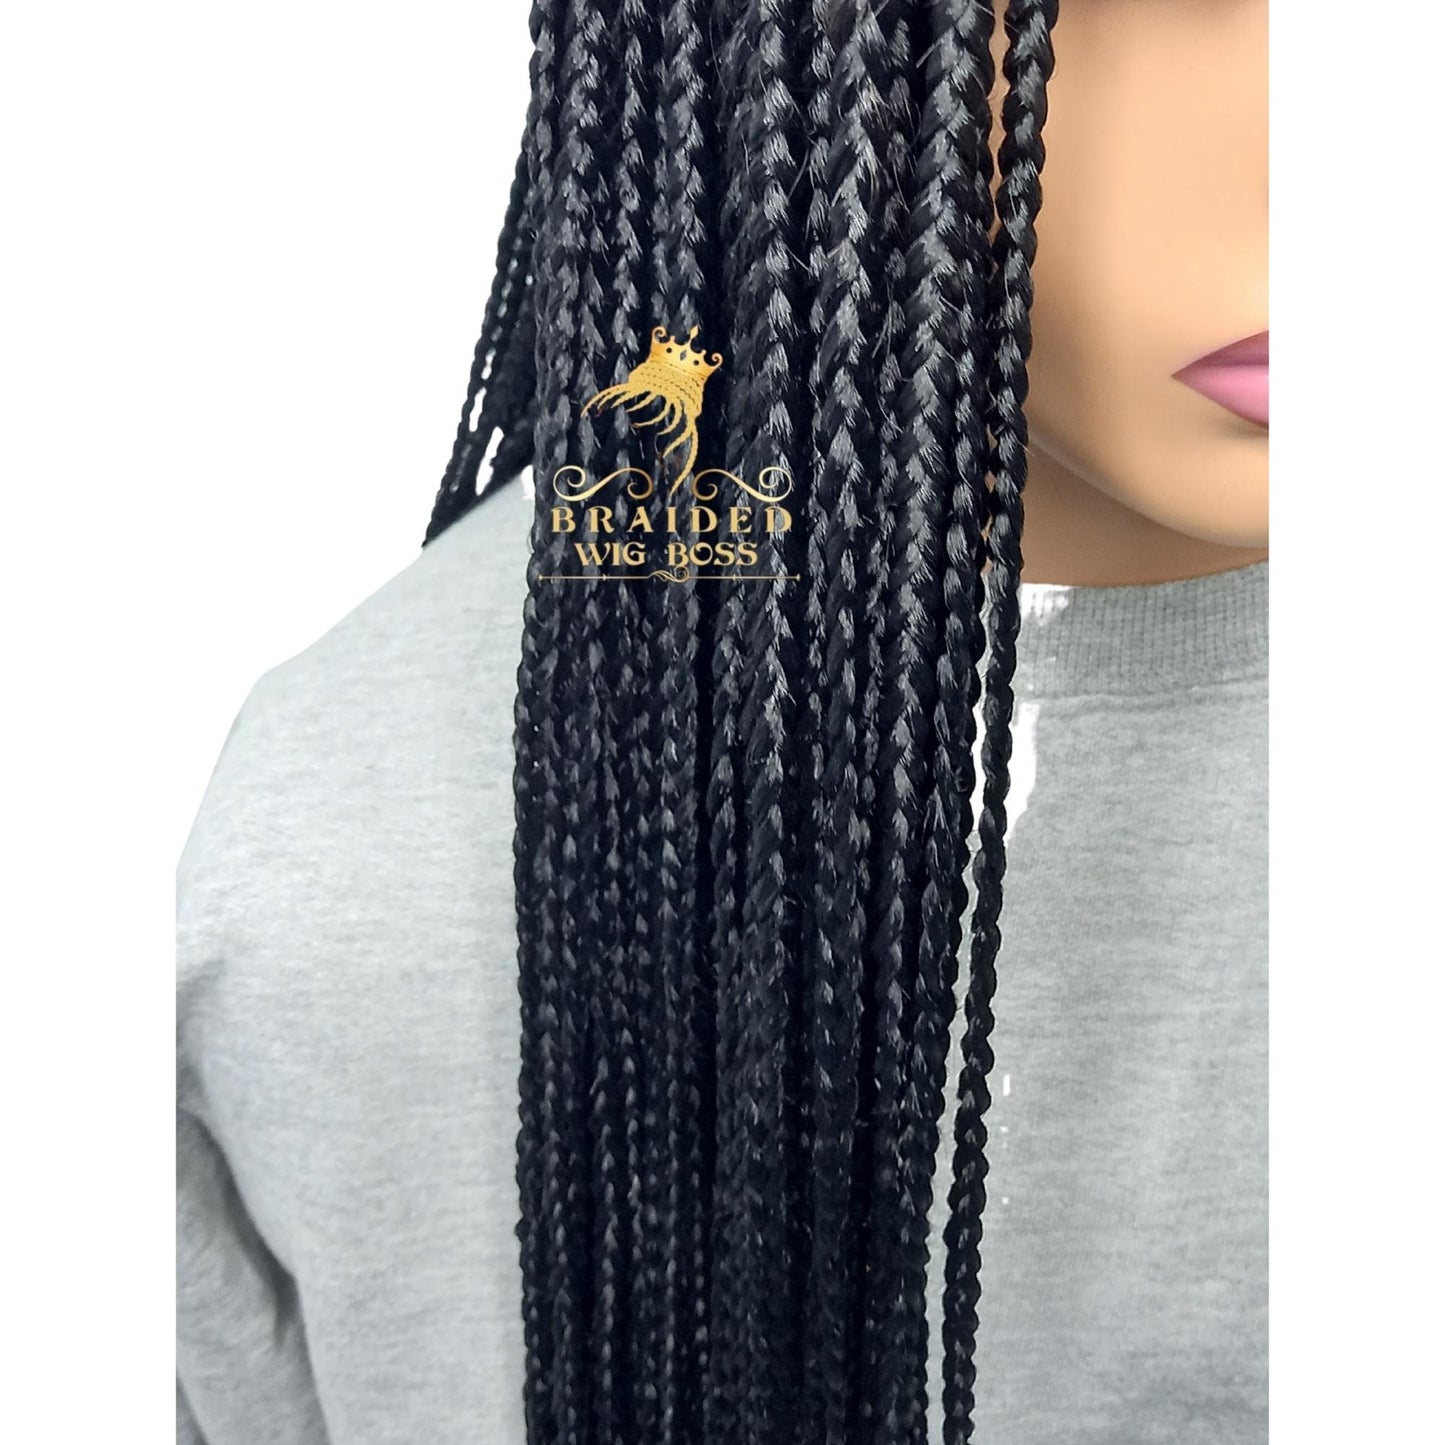 13x4 Knotless Braid Wig for Black Women - Box Braids Synthetic Braided Lace Front Wig in Color 2 Available in Multiple Lengths and Colors - BRAIDED WIG BOSS